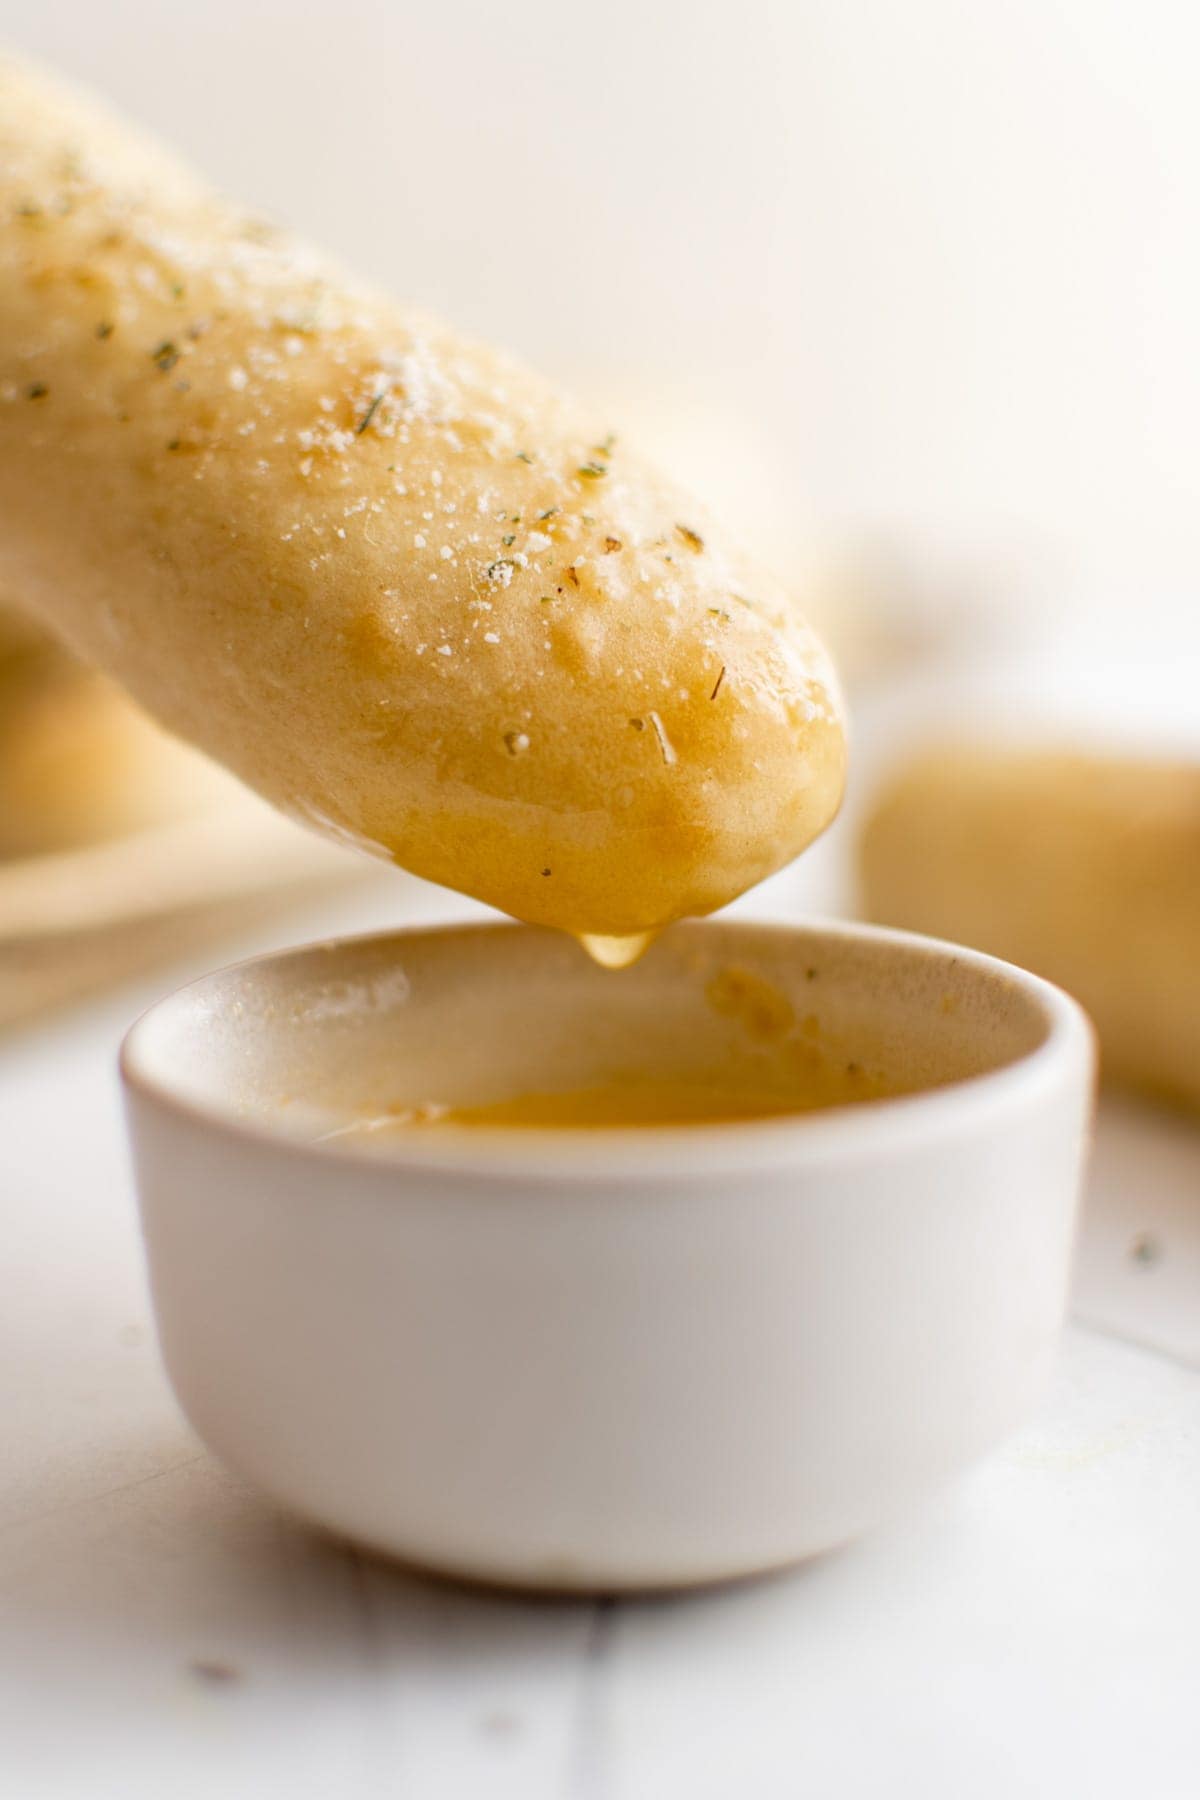 homemade breadstick dipped in melted garlic butter